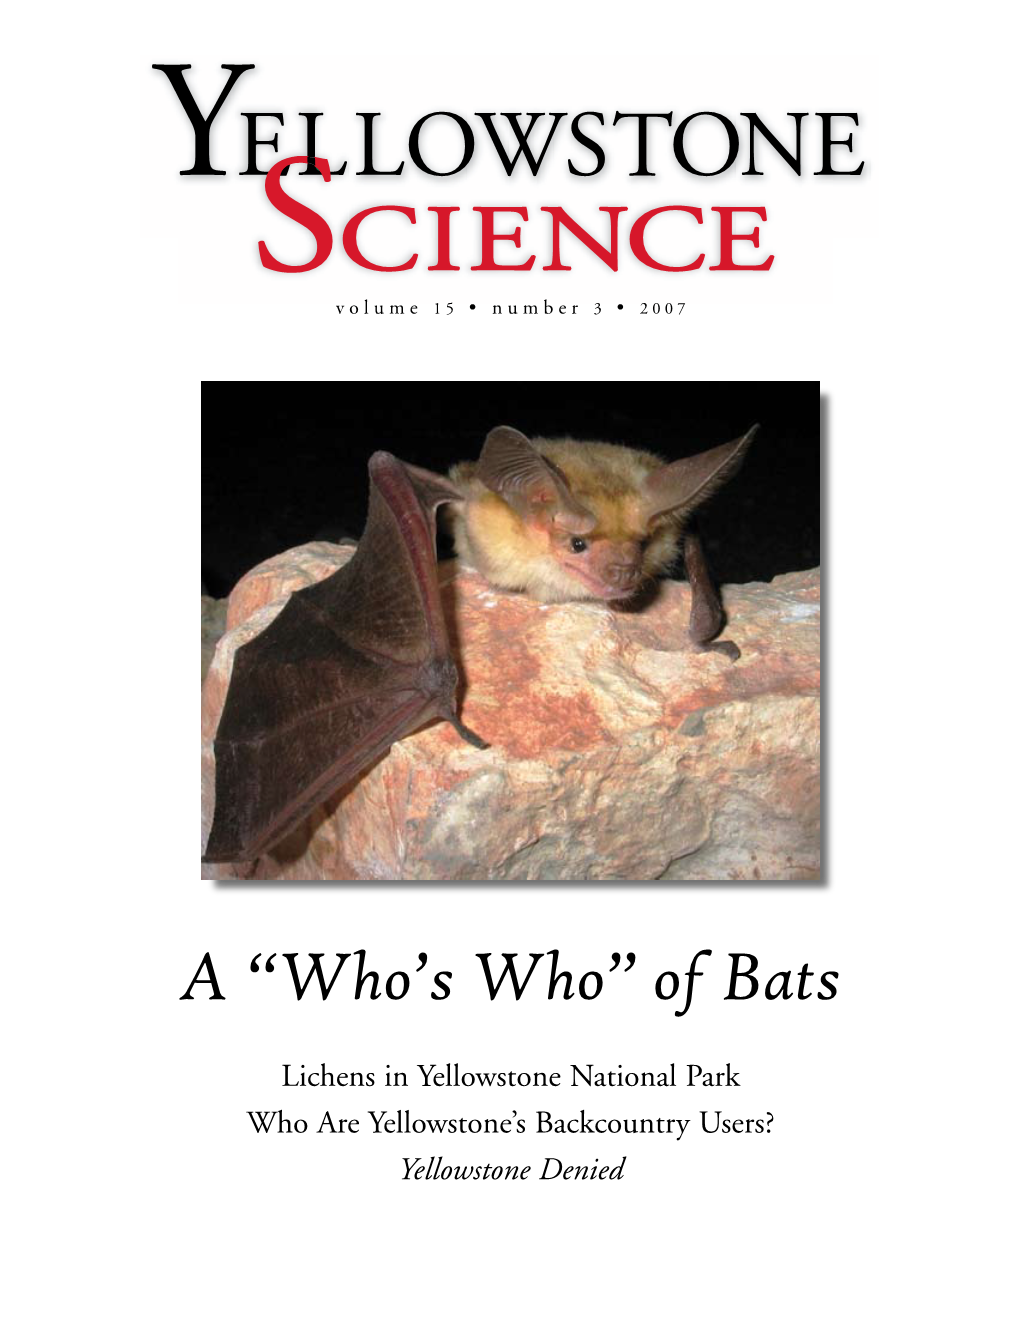 A “Who's Who” of Bats